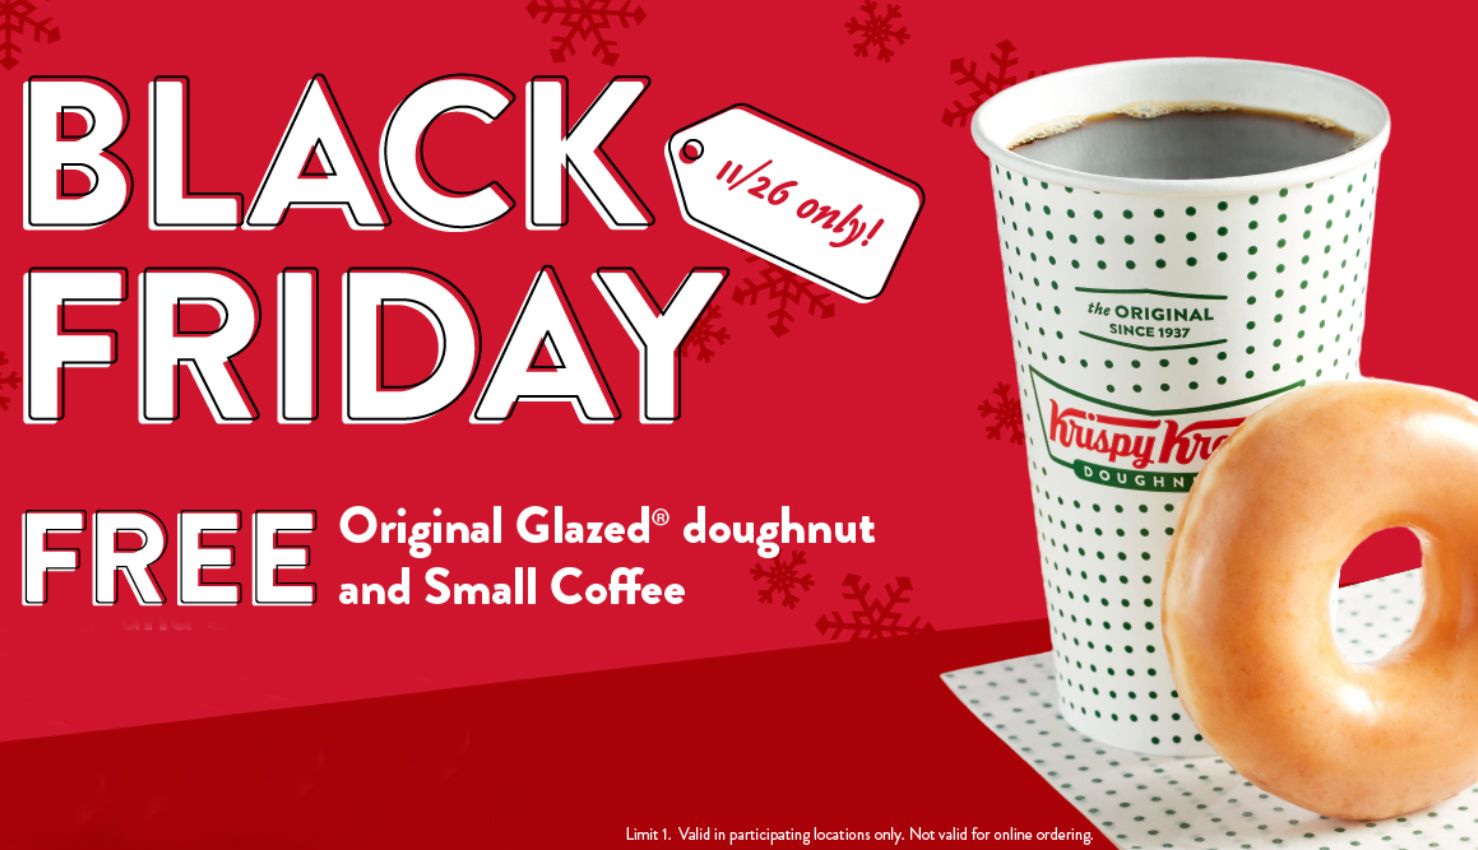 This Black Friday Receive a Free Original Glazed Doughnut and Small Coffee In-shop at Krispy Kreme